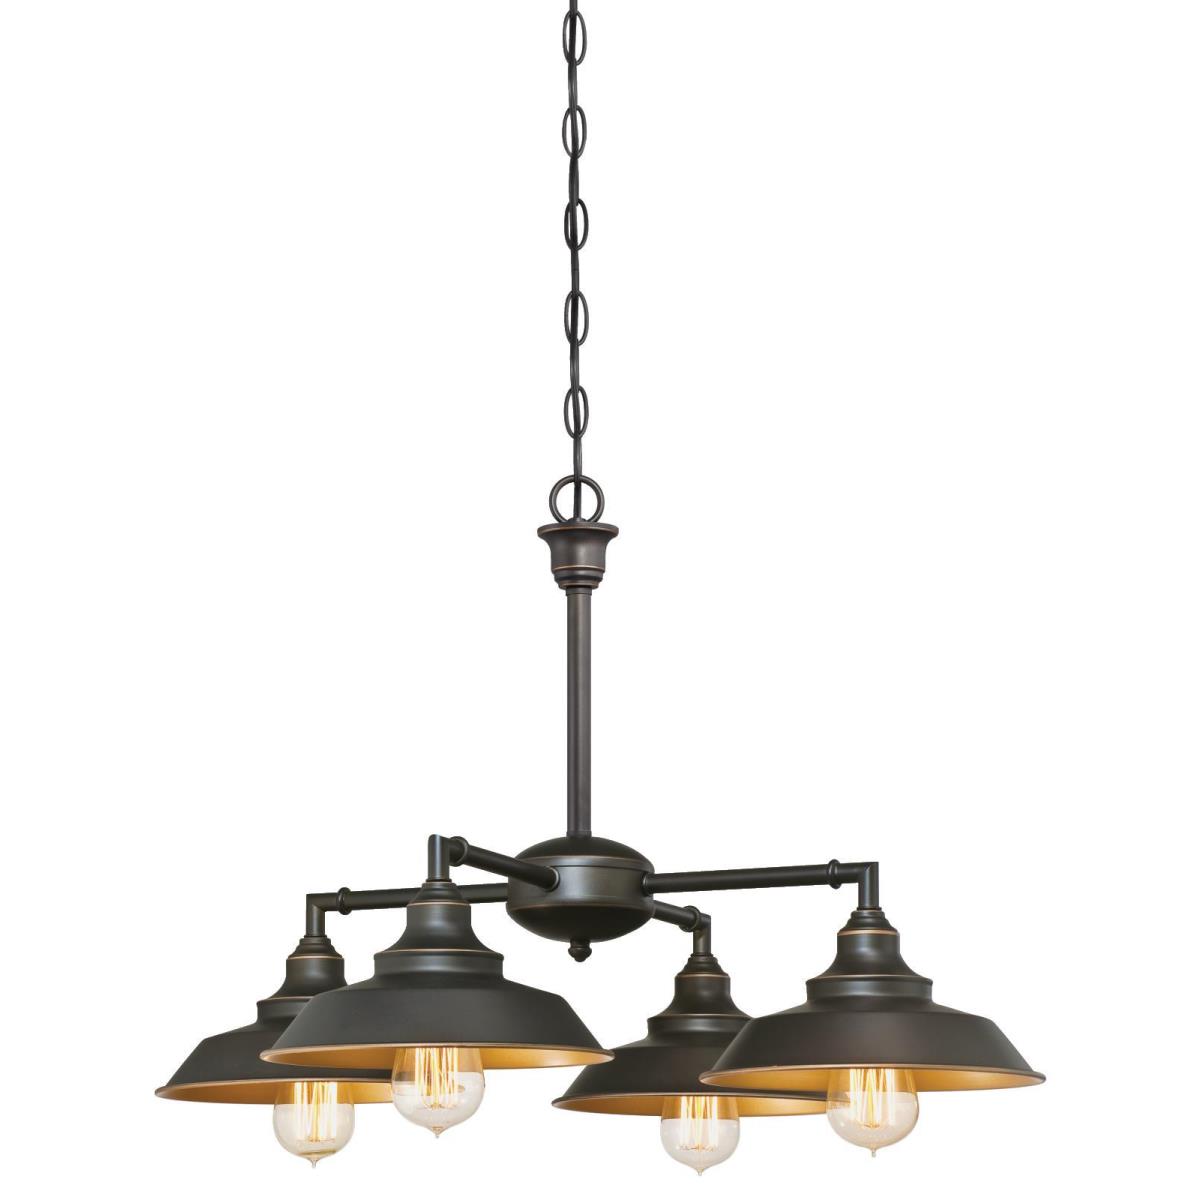 4 Light Chandelier/Semi-Flush Oil Rubbed Bronze Finish with Highlights and Metallic Bronze Interior